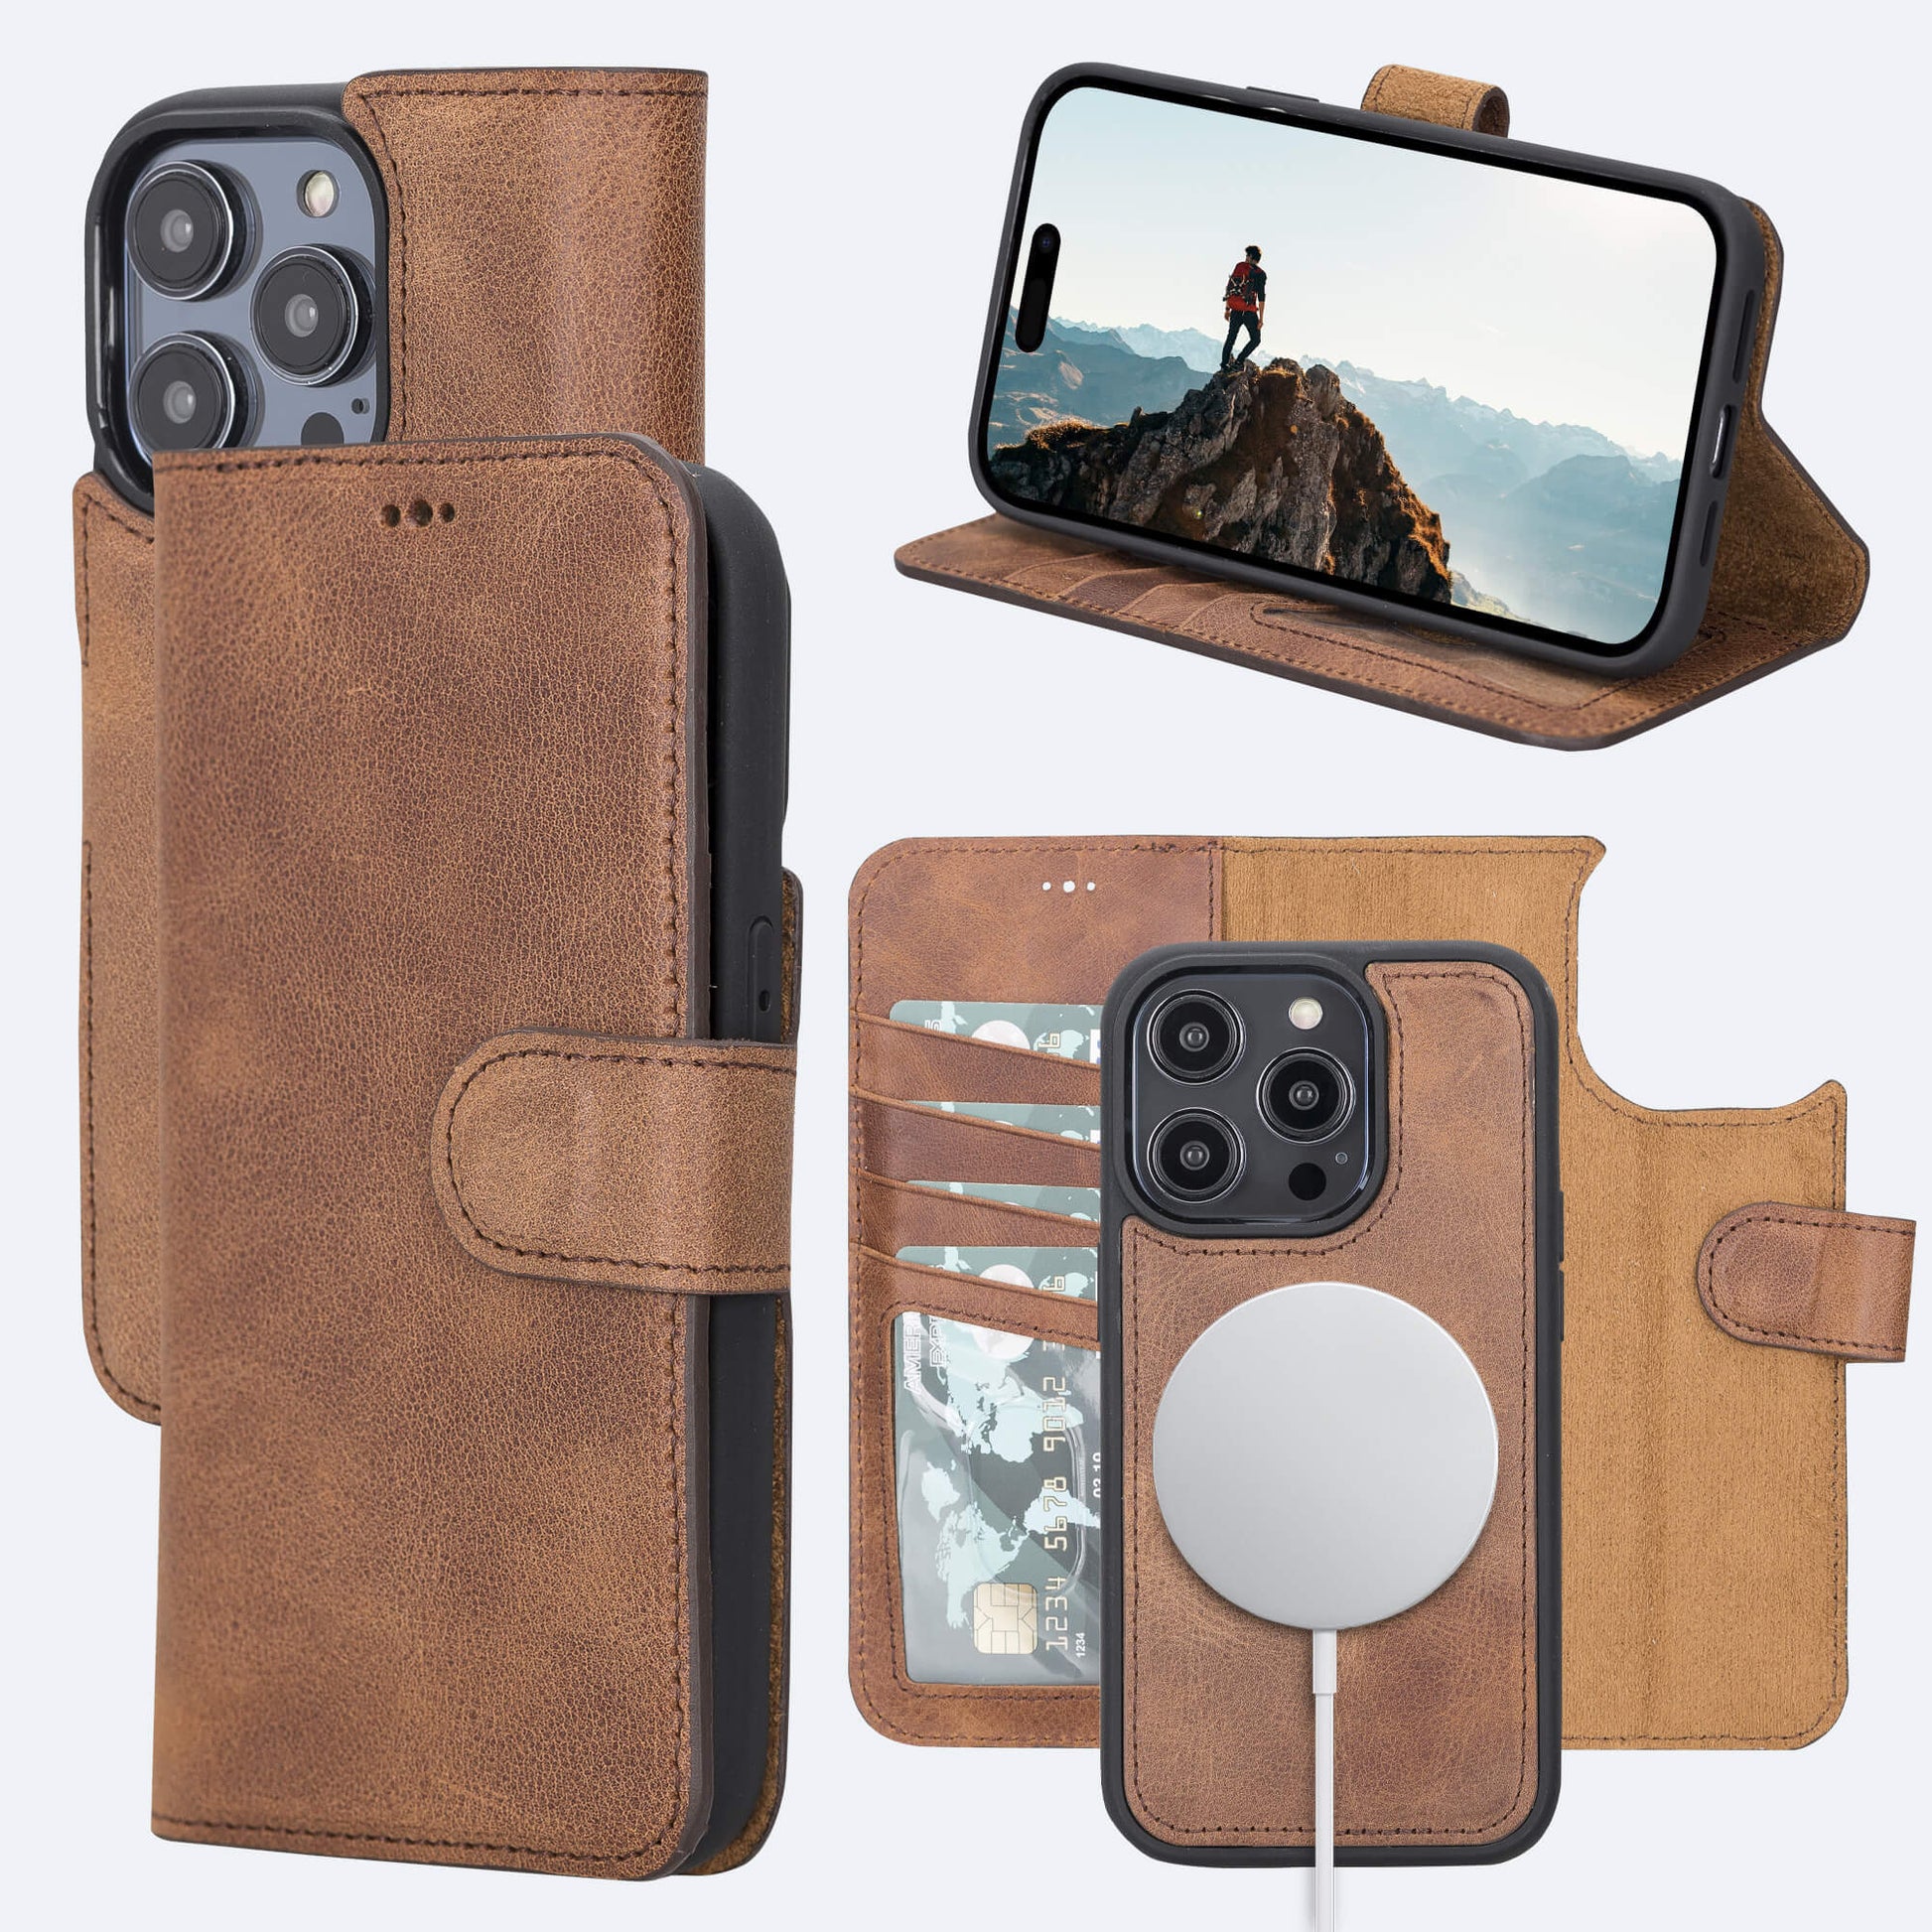 wowacase Card Slot Leather iPhone 13 Pro Max Wallet Case with Card Holder (Color: Khaki)